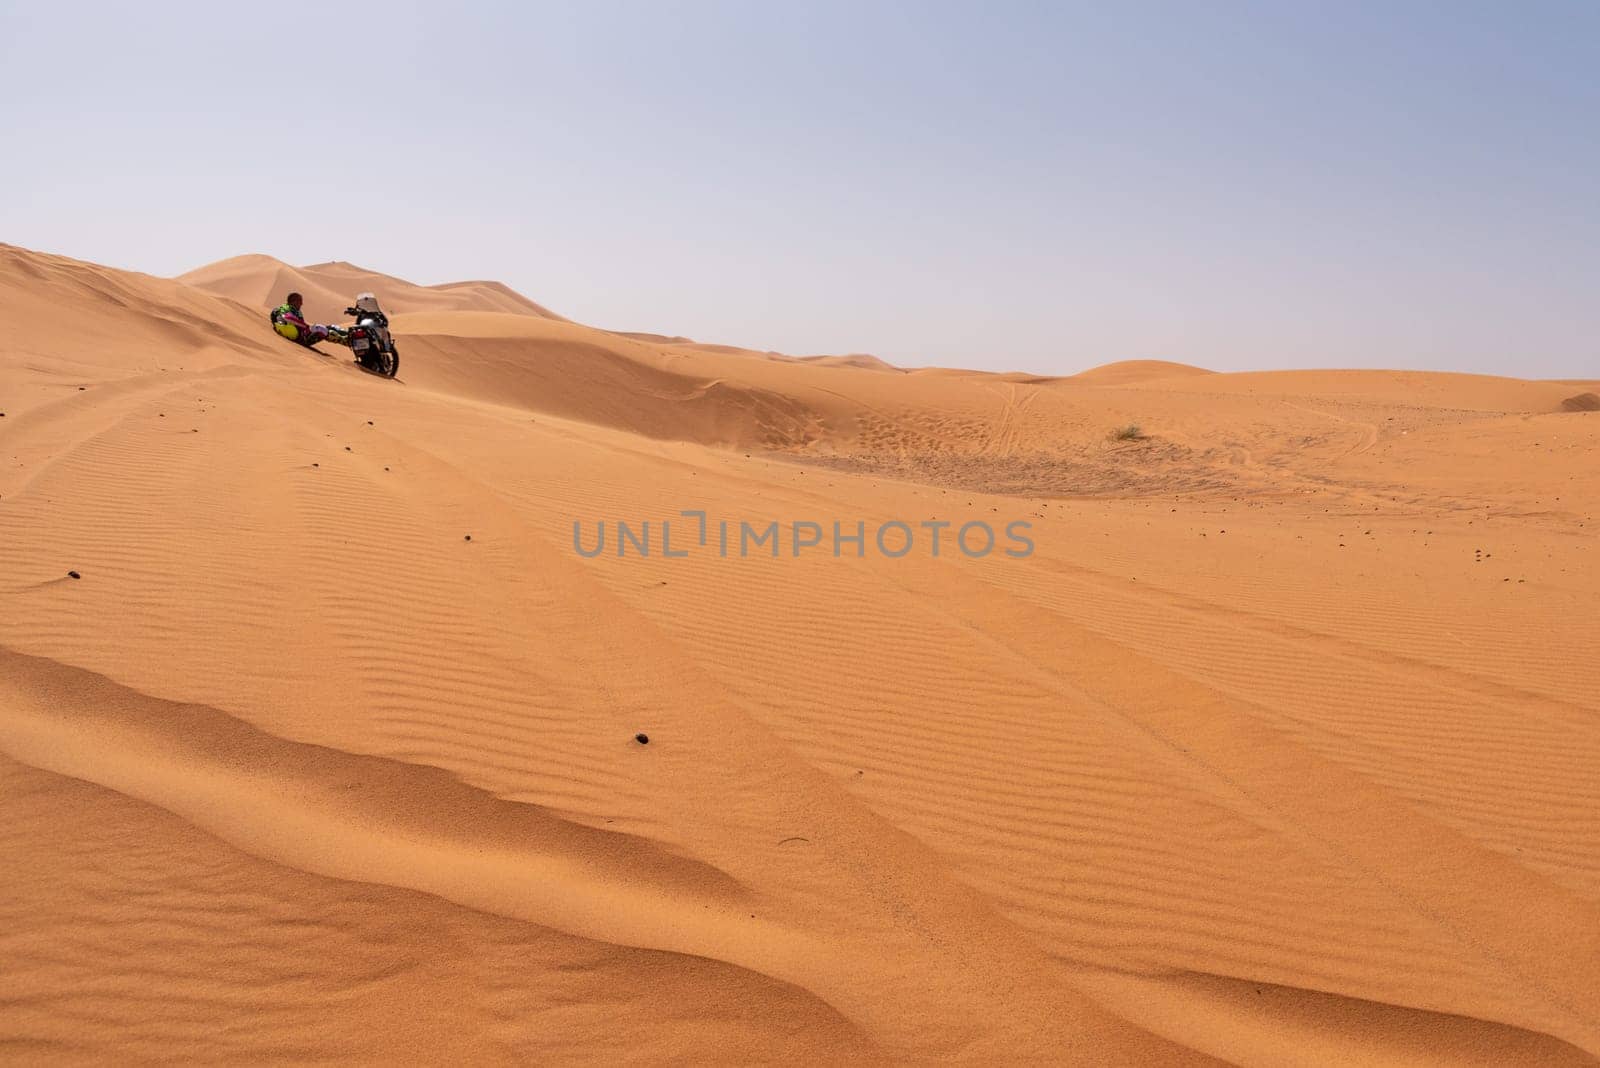 A motorbiker driving off-road in the Erg Chebbi desert became stuck in the sand by imagoDens